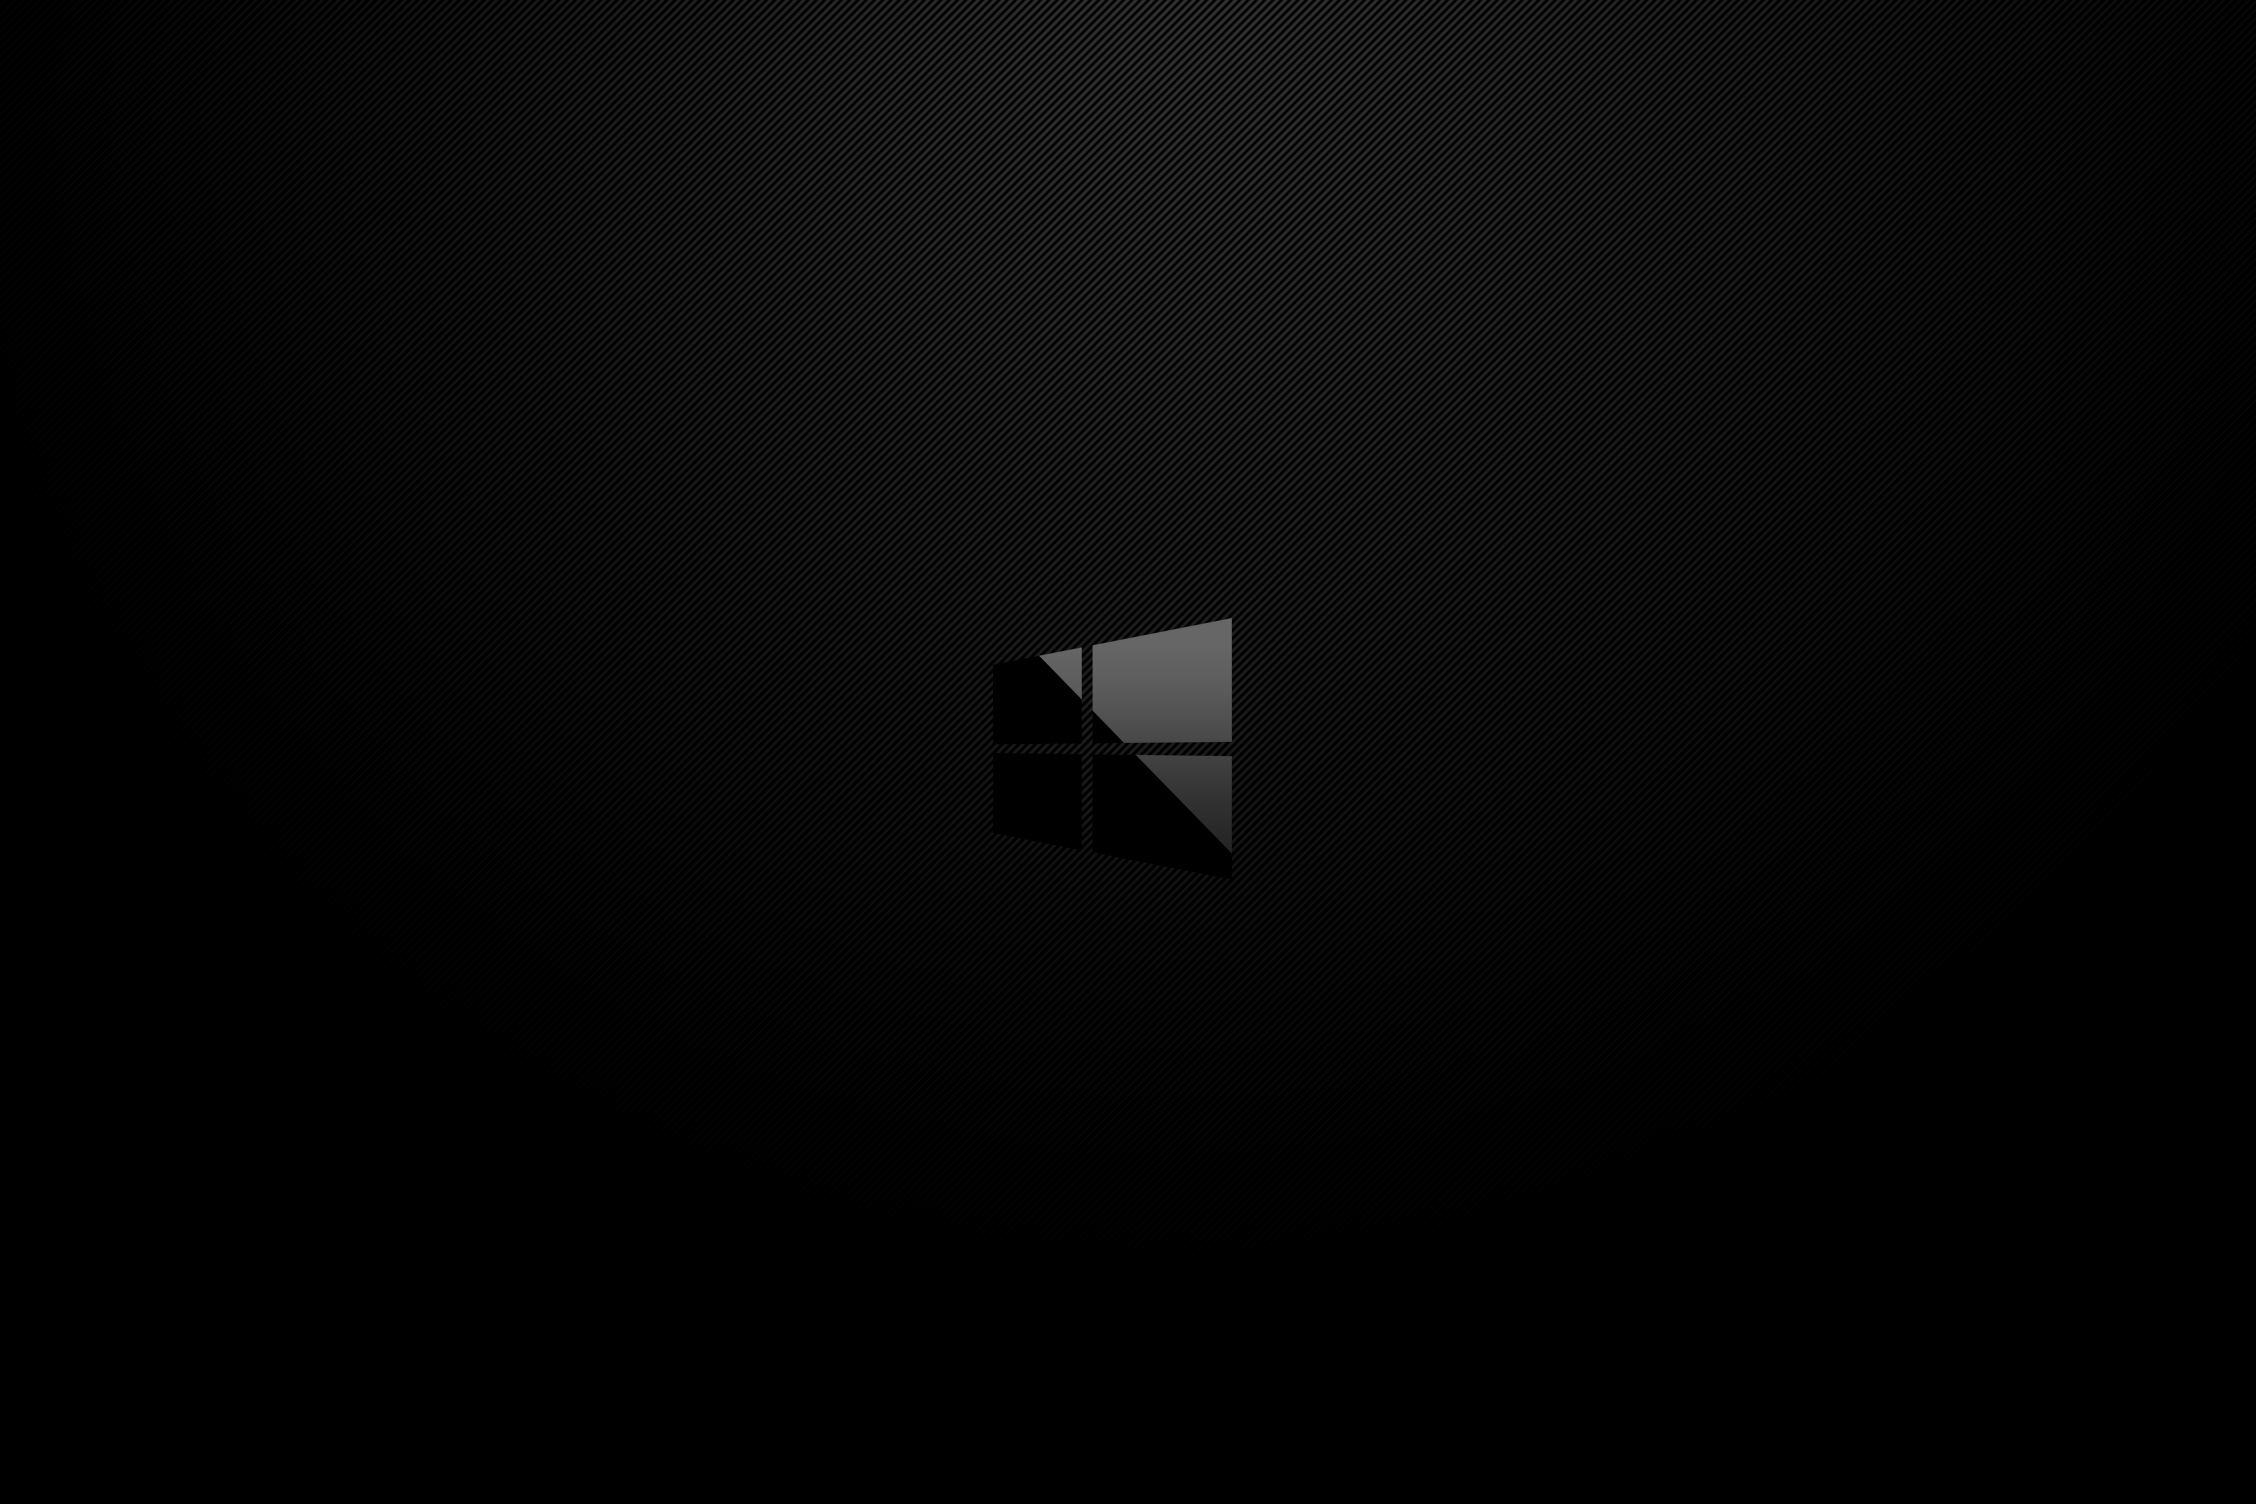 Made a dark minimalist wallpaper for my Surface Laptop. Feel free to use if you like!